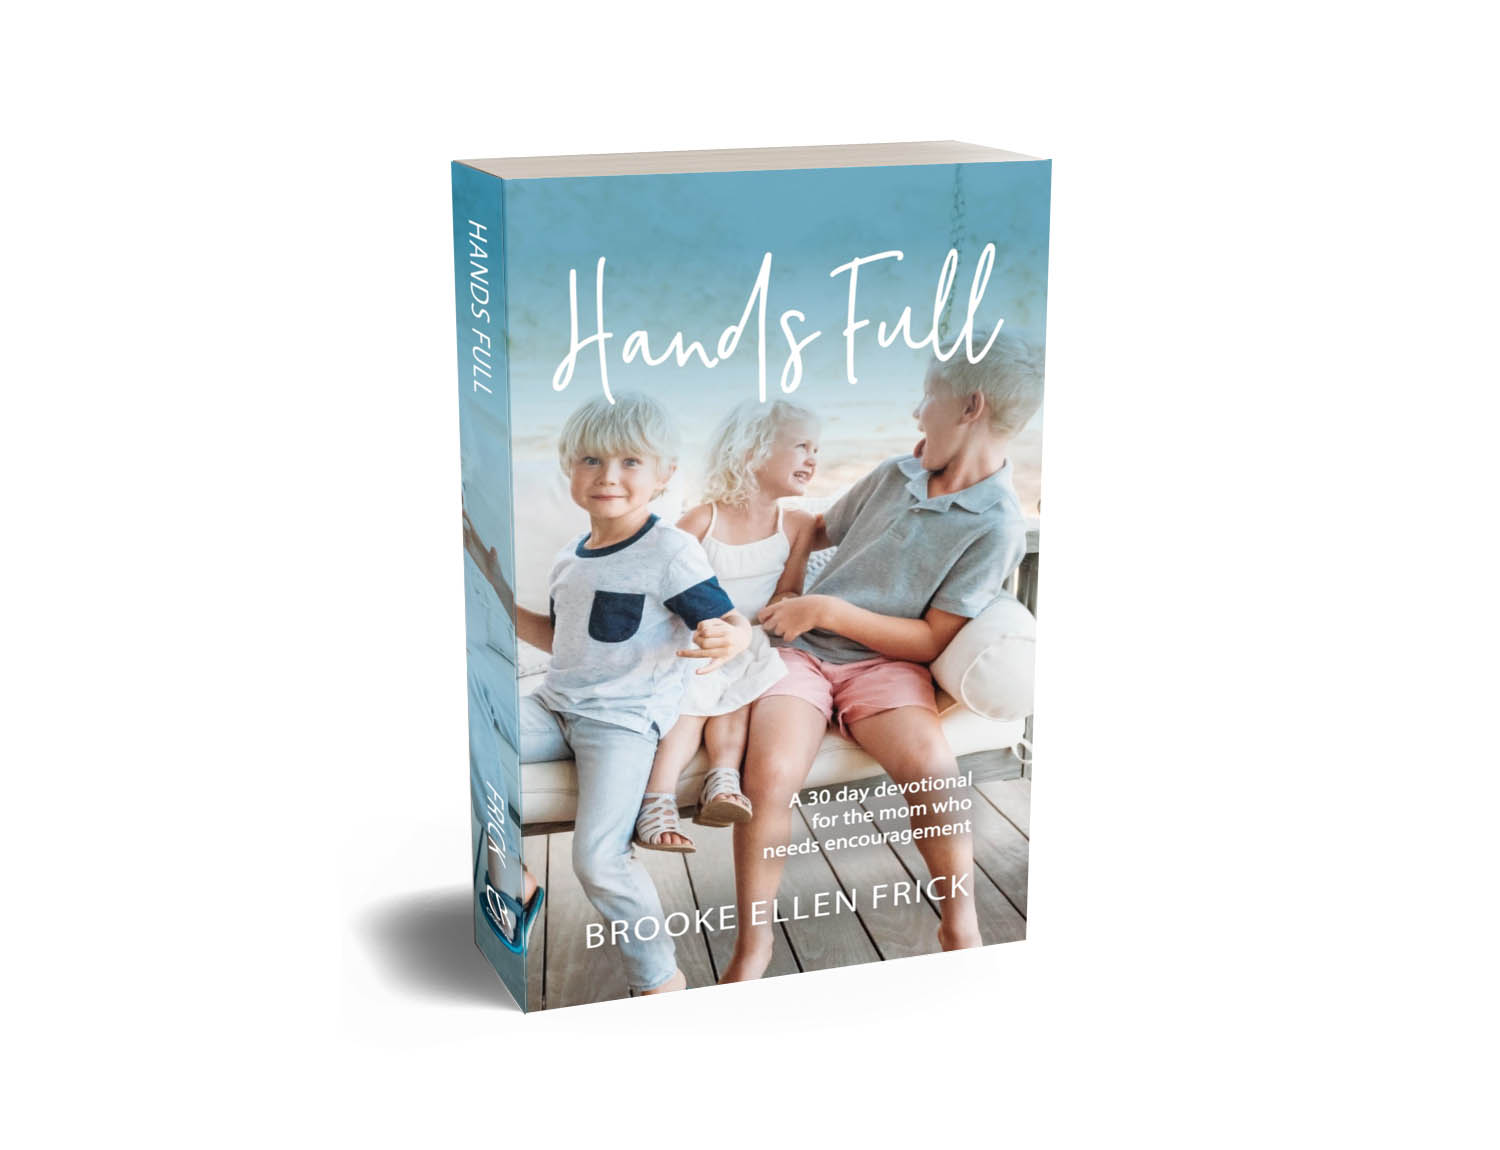 Hands Full - daily devotions for women by Brooke Ellen Frick - Christian books daily devotional for mothers